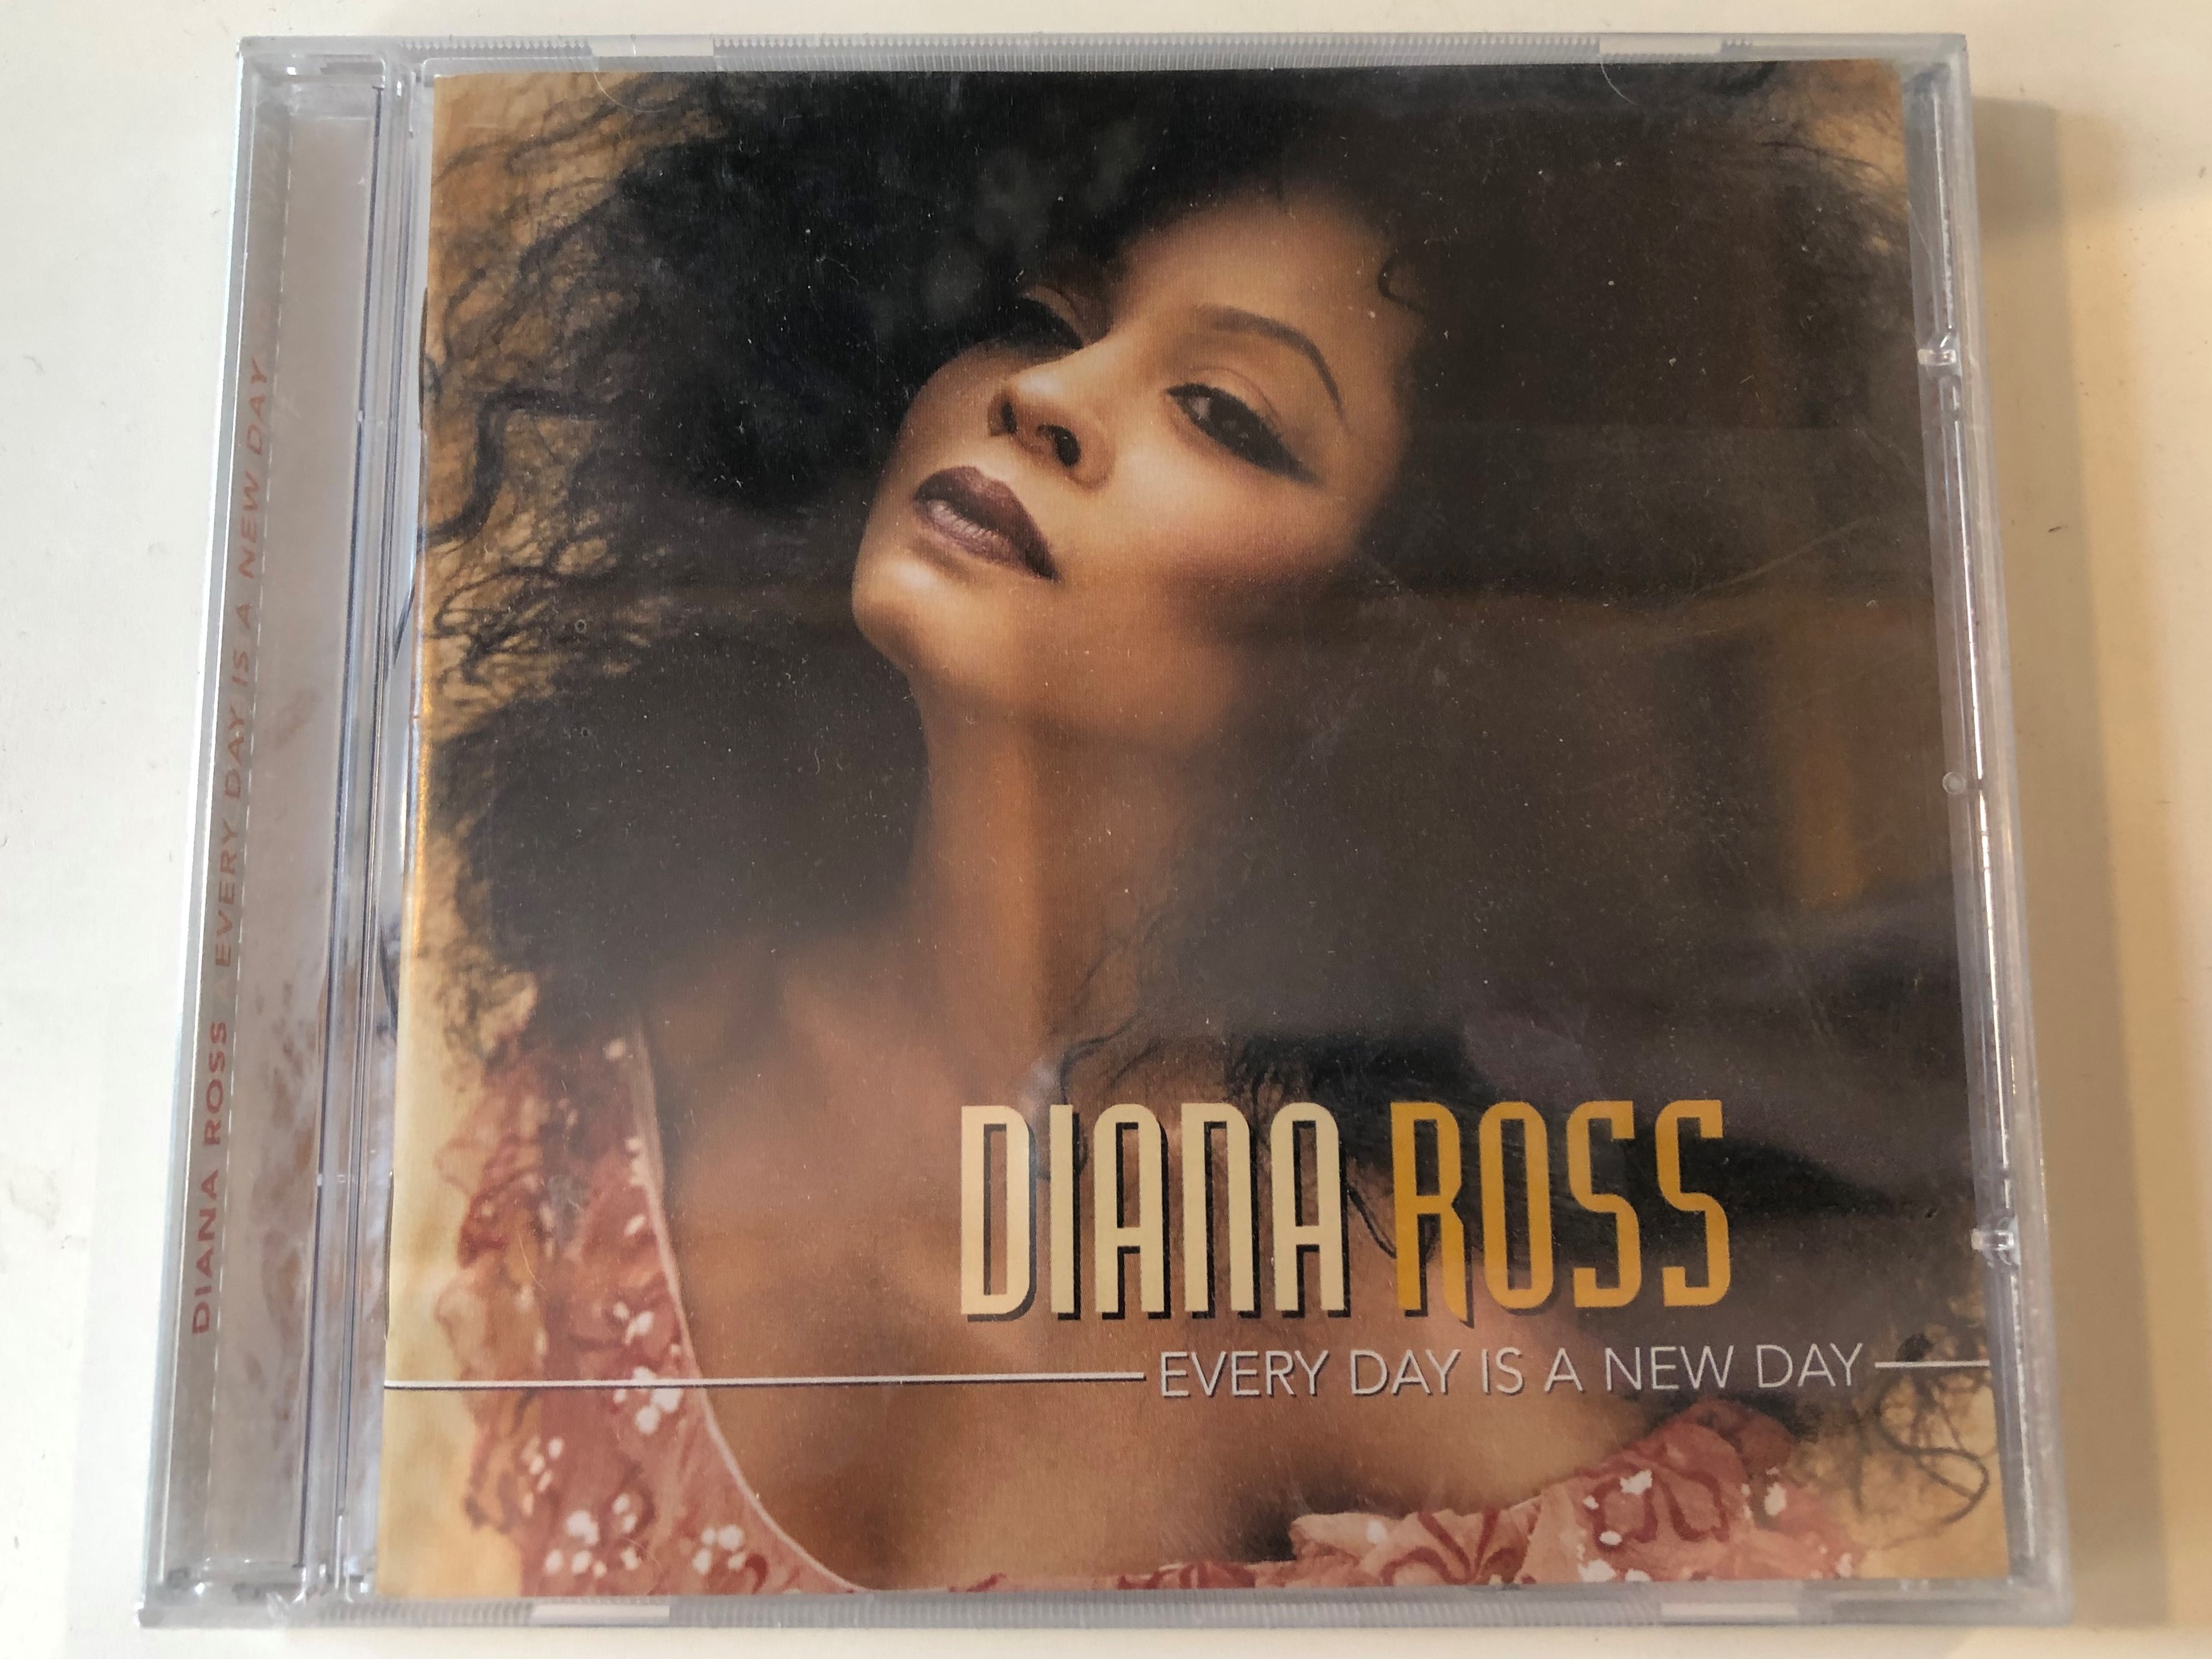 diana-ross-every-day-is-a-new-day-emi-records-audio-cd-1999-724352147625-1-.jpg